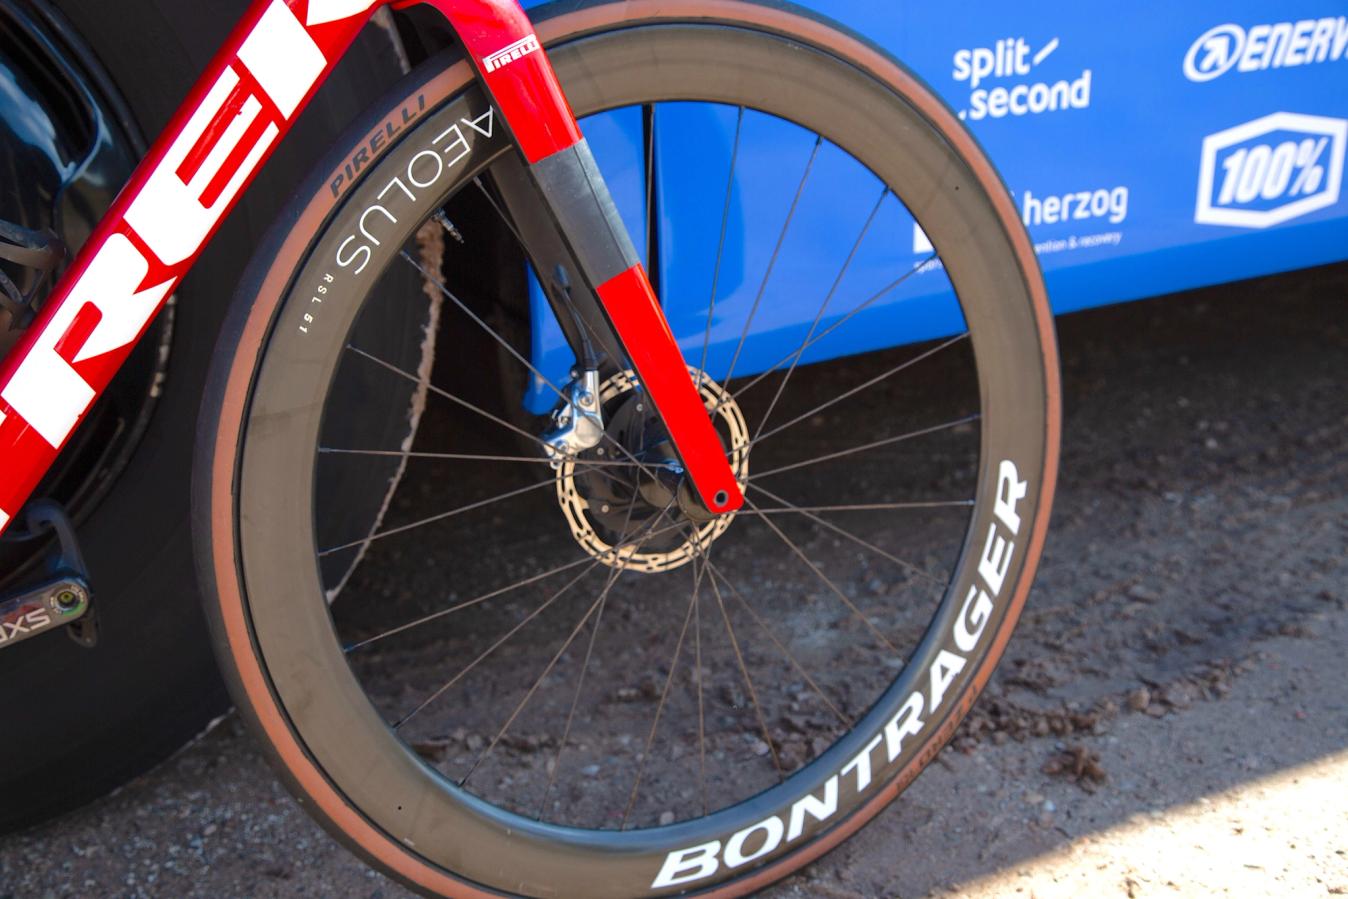 Bontrager, owned by Trek, supplies the wheels